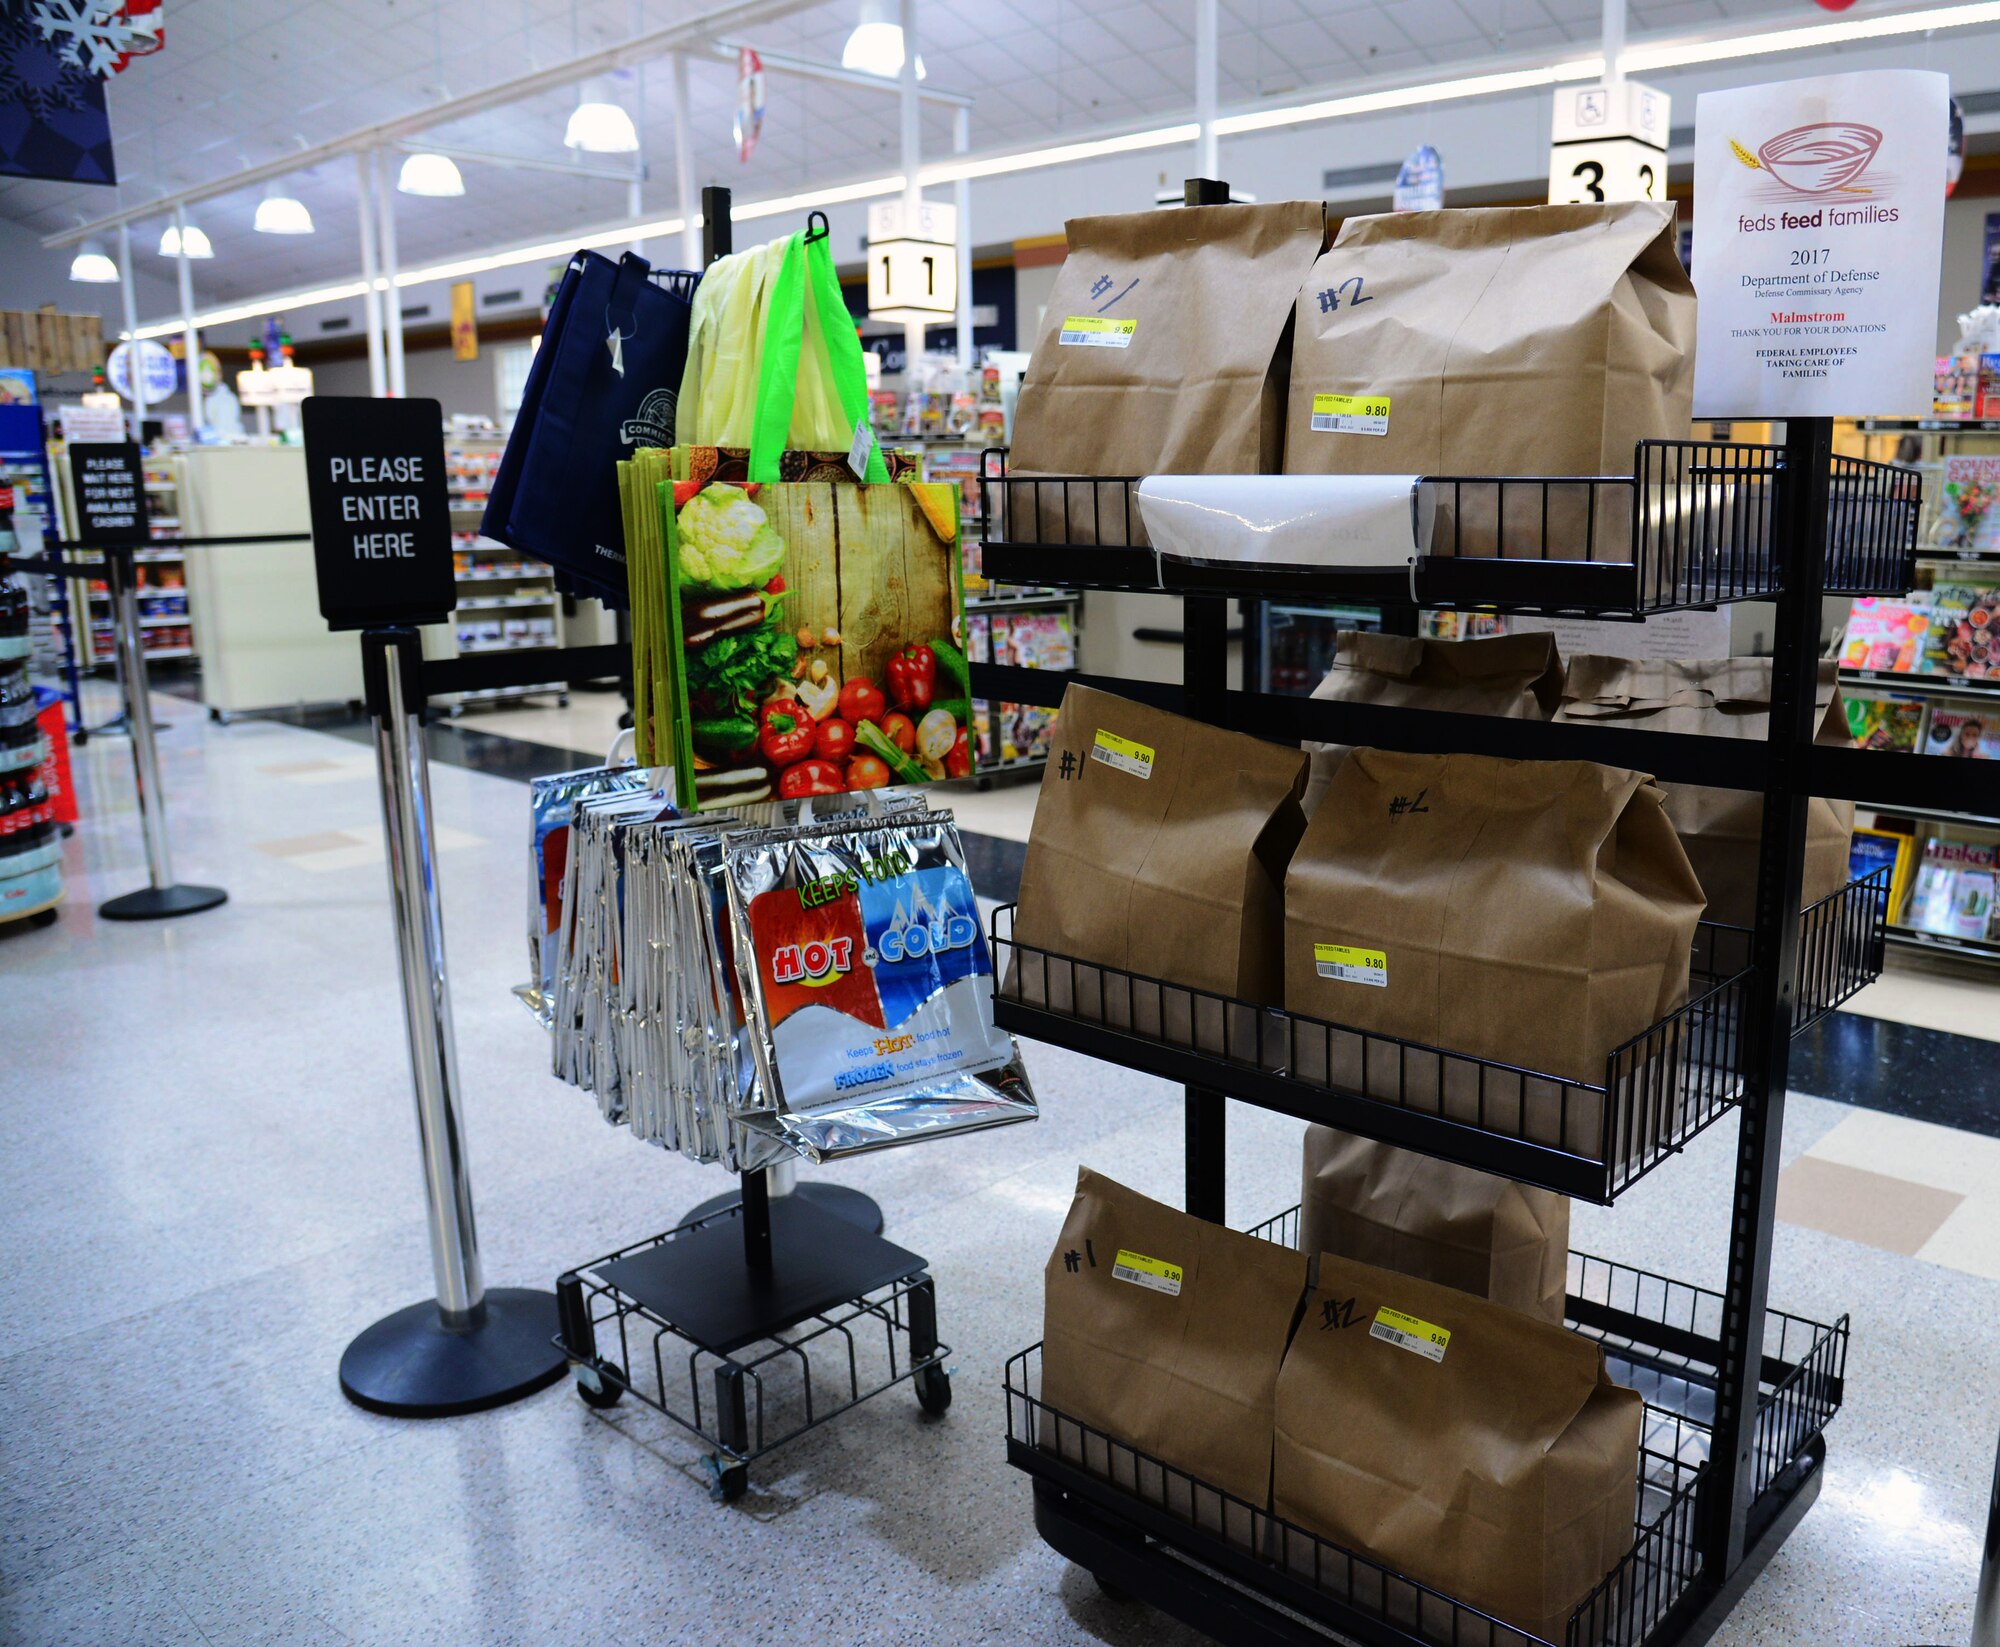 A stand of premade Feds Feed Families donation bags are displayed June 29, 2017, at Malmstrom Air Force Base, Mont. The Malmstrom Commissary curated bags for convenient donation; one for food items and one for non-food items, such as toiletries. (U.S. Air Force photo/Senior Airman Magen M. Reeves)  